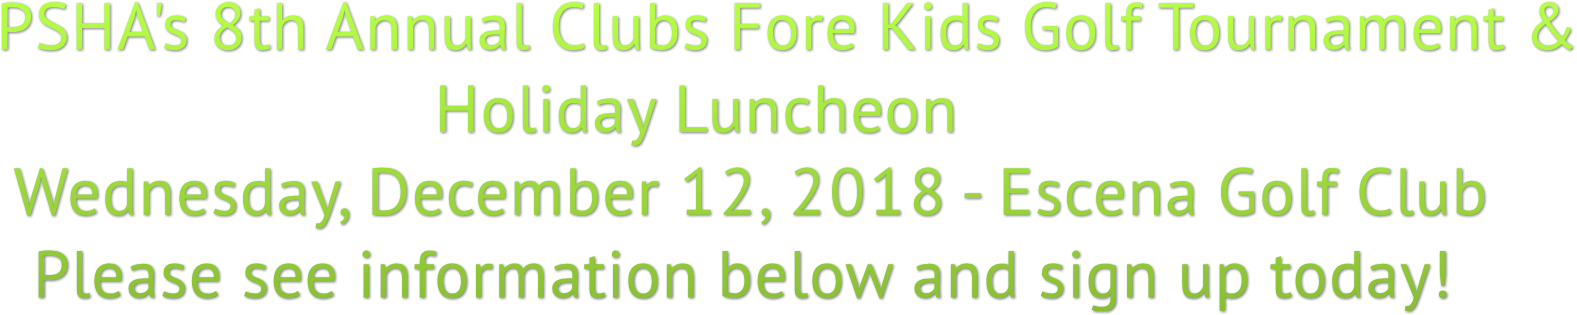 PSHA&#39;s 8th Annual Clubs Fore Kids Golf Tournament &amp; Holiday Luncheon Wednesday, December 12, 2018 - Escena Golf Club Please see information below and sign up today!